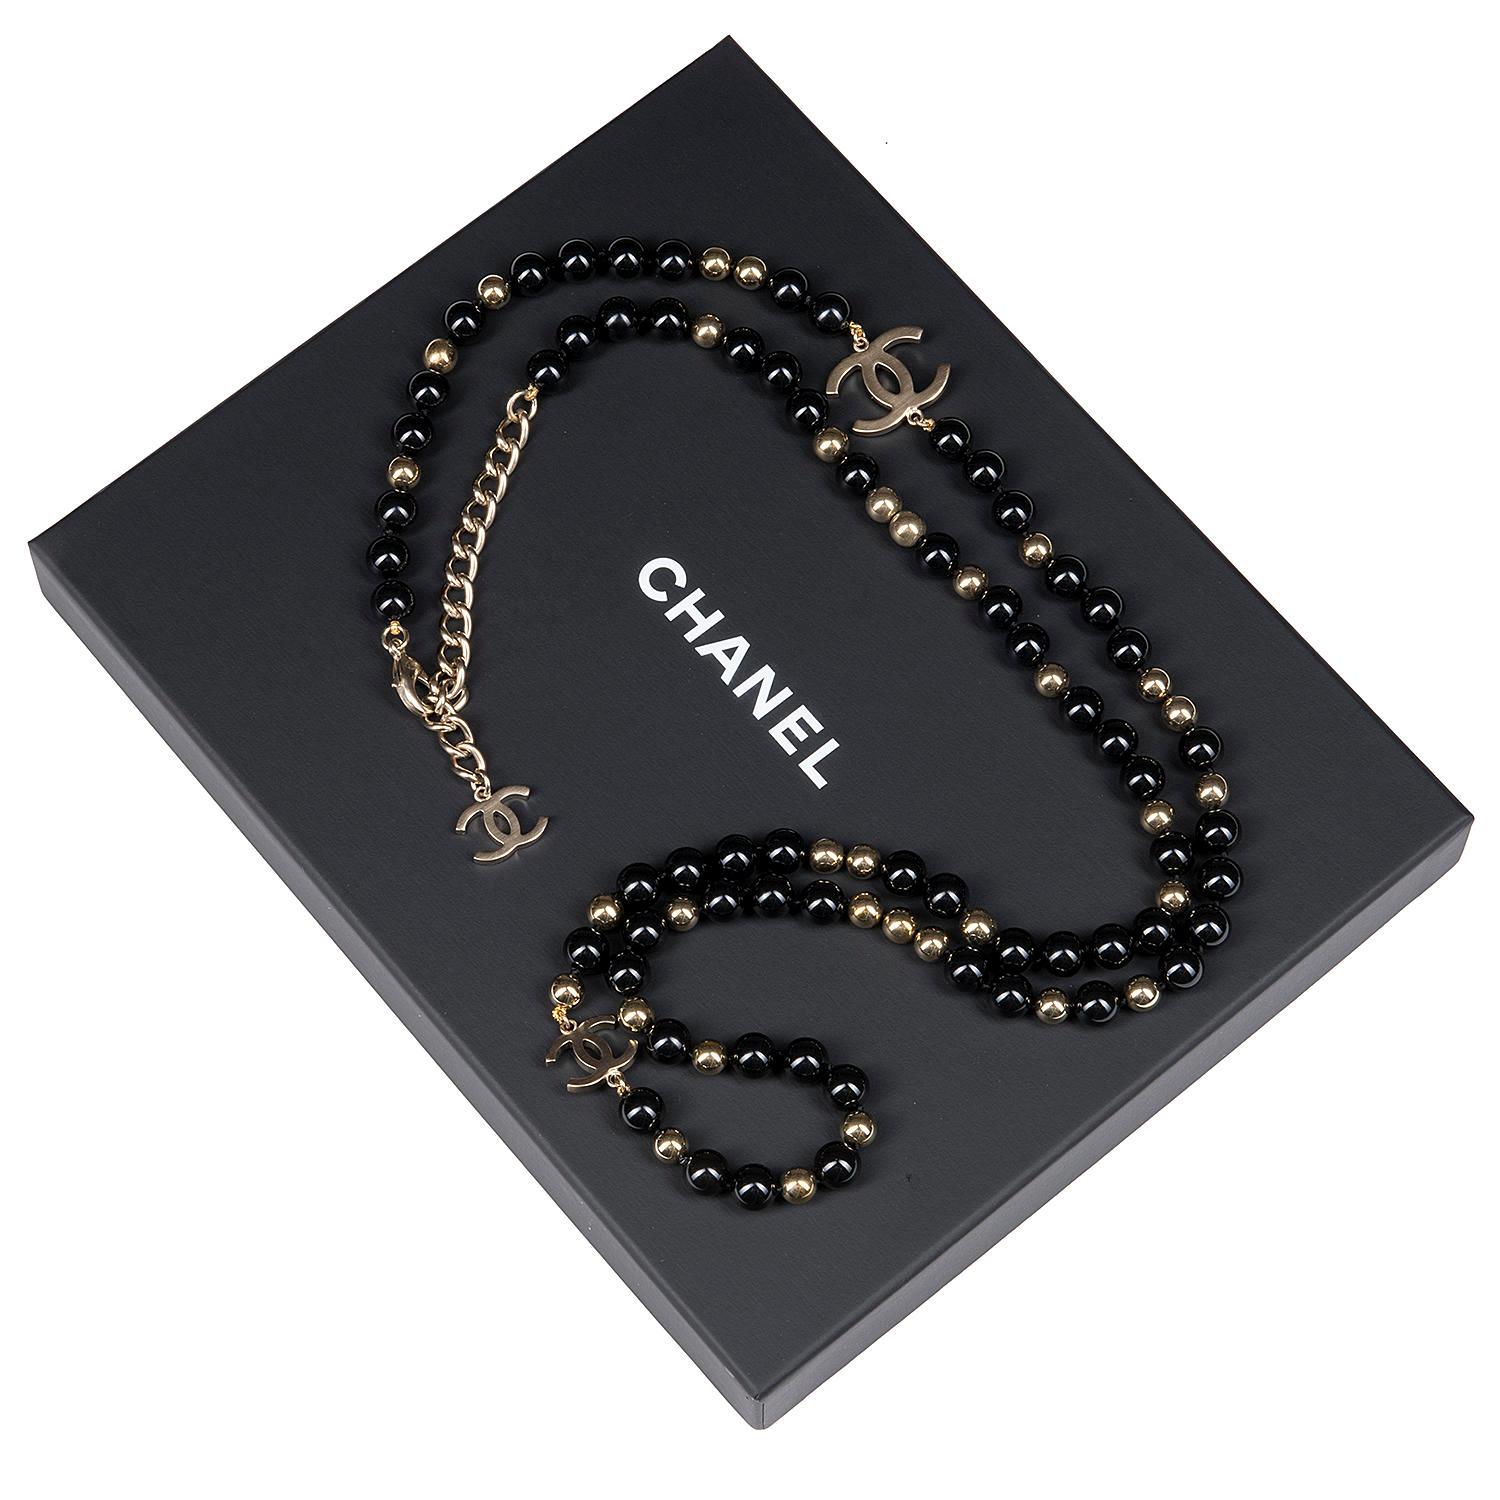 This Beautiful Tres Chic Chanel Necklace has gold and black baubles of varying size, embellished with large and small gold 'CC' Logos. Measuring 44in. long the necklace can be doubled and worn as a shorter drop necklace for different occasions. The